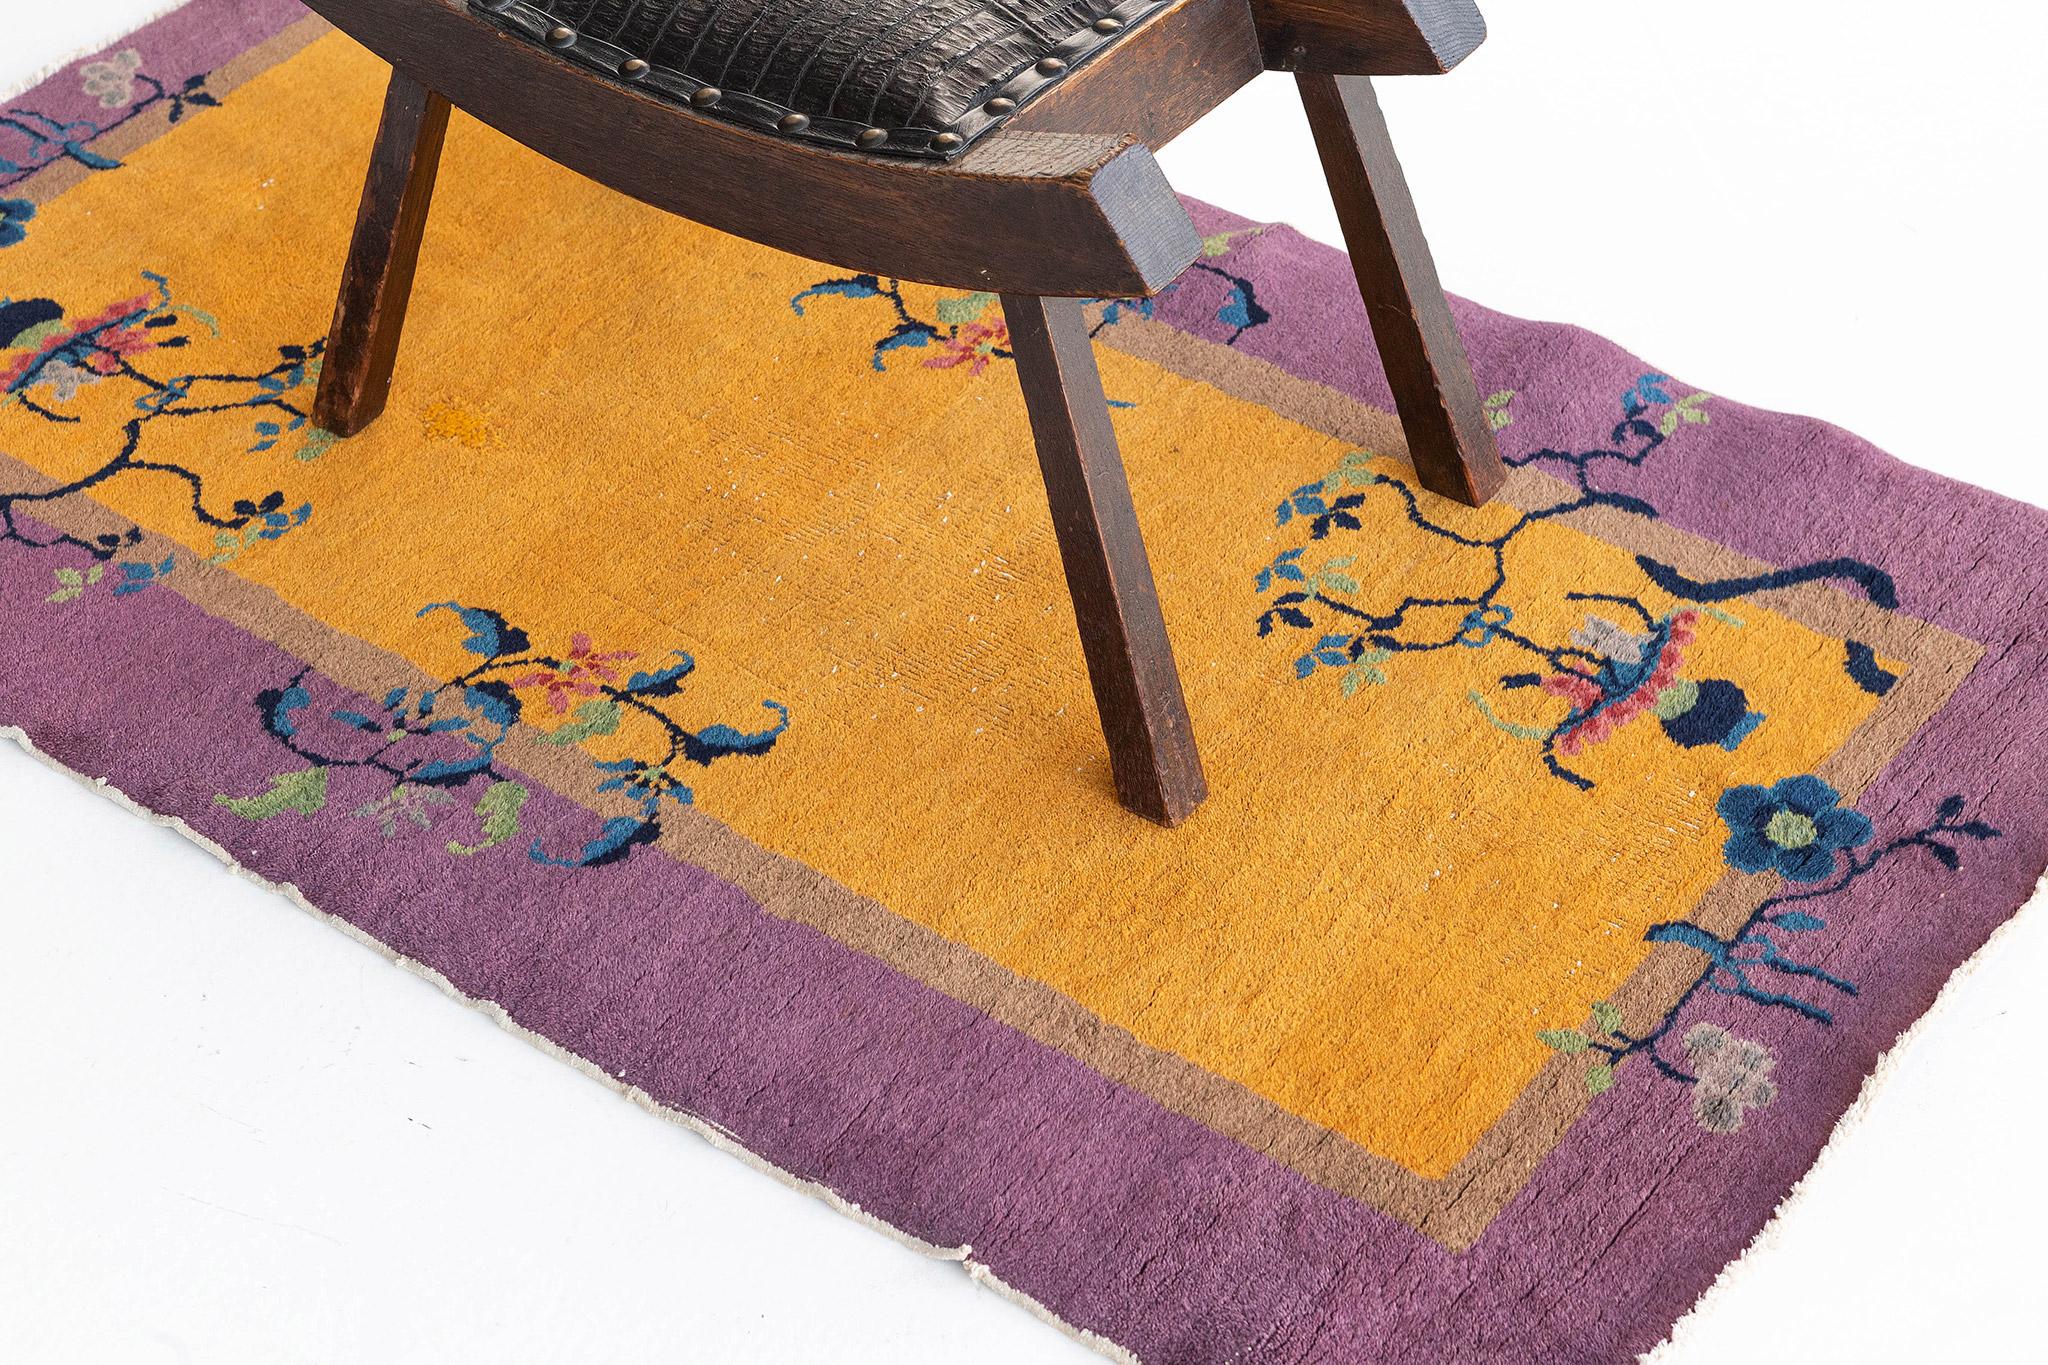 Nichol is a vintage Chinese art deco Rug that will leave lasting impressions and elevate any design space. The bold saffron yellow field and purple borders together with the traditional floral vines work to create a vibrant and fashionable